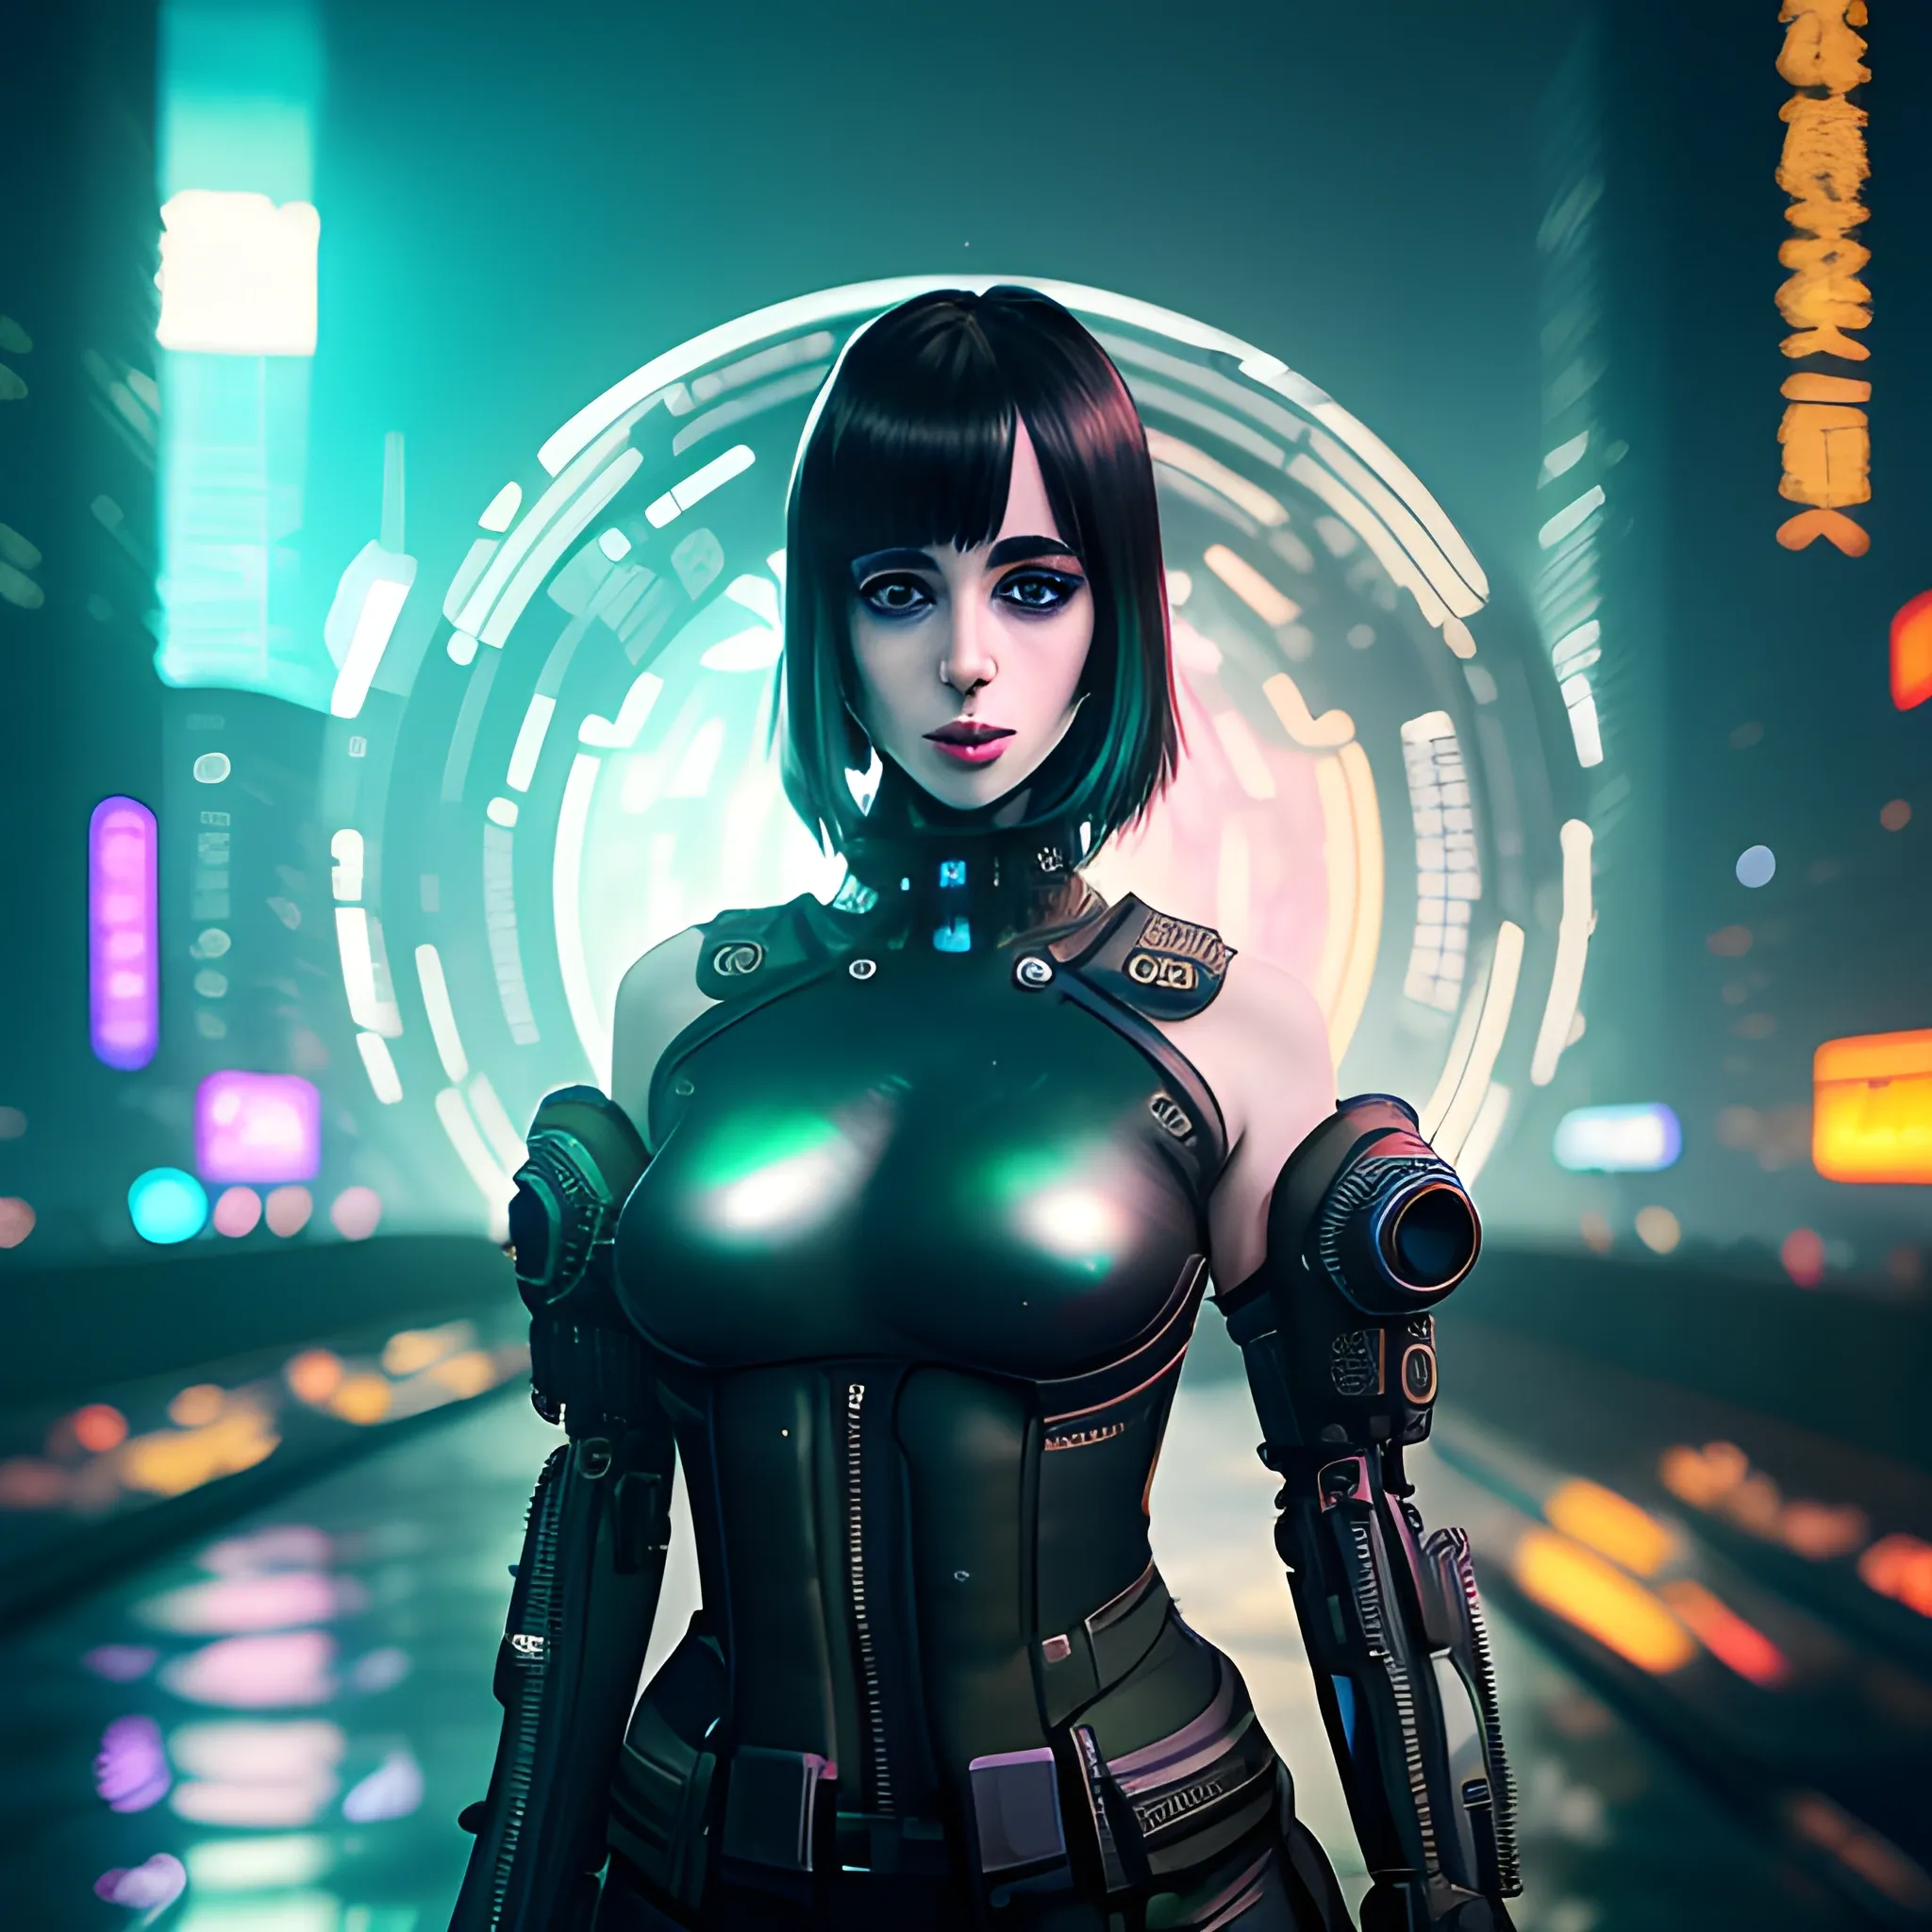 very 
beautiful Female, Cyberpunk Night City, black hole, singularity, apocalypse, Cthuru, grand worldview, strong visual impact, Krysten Ritter goth black bangs makeup, the picture should have the feeling of immersion, -- ar 9, KS, Cai Guo-Qiang, soft lights, Depth of field (DOF), Full Length Shot (FLS)